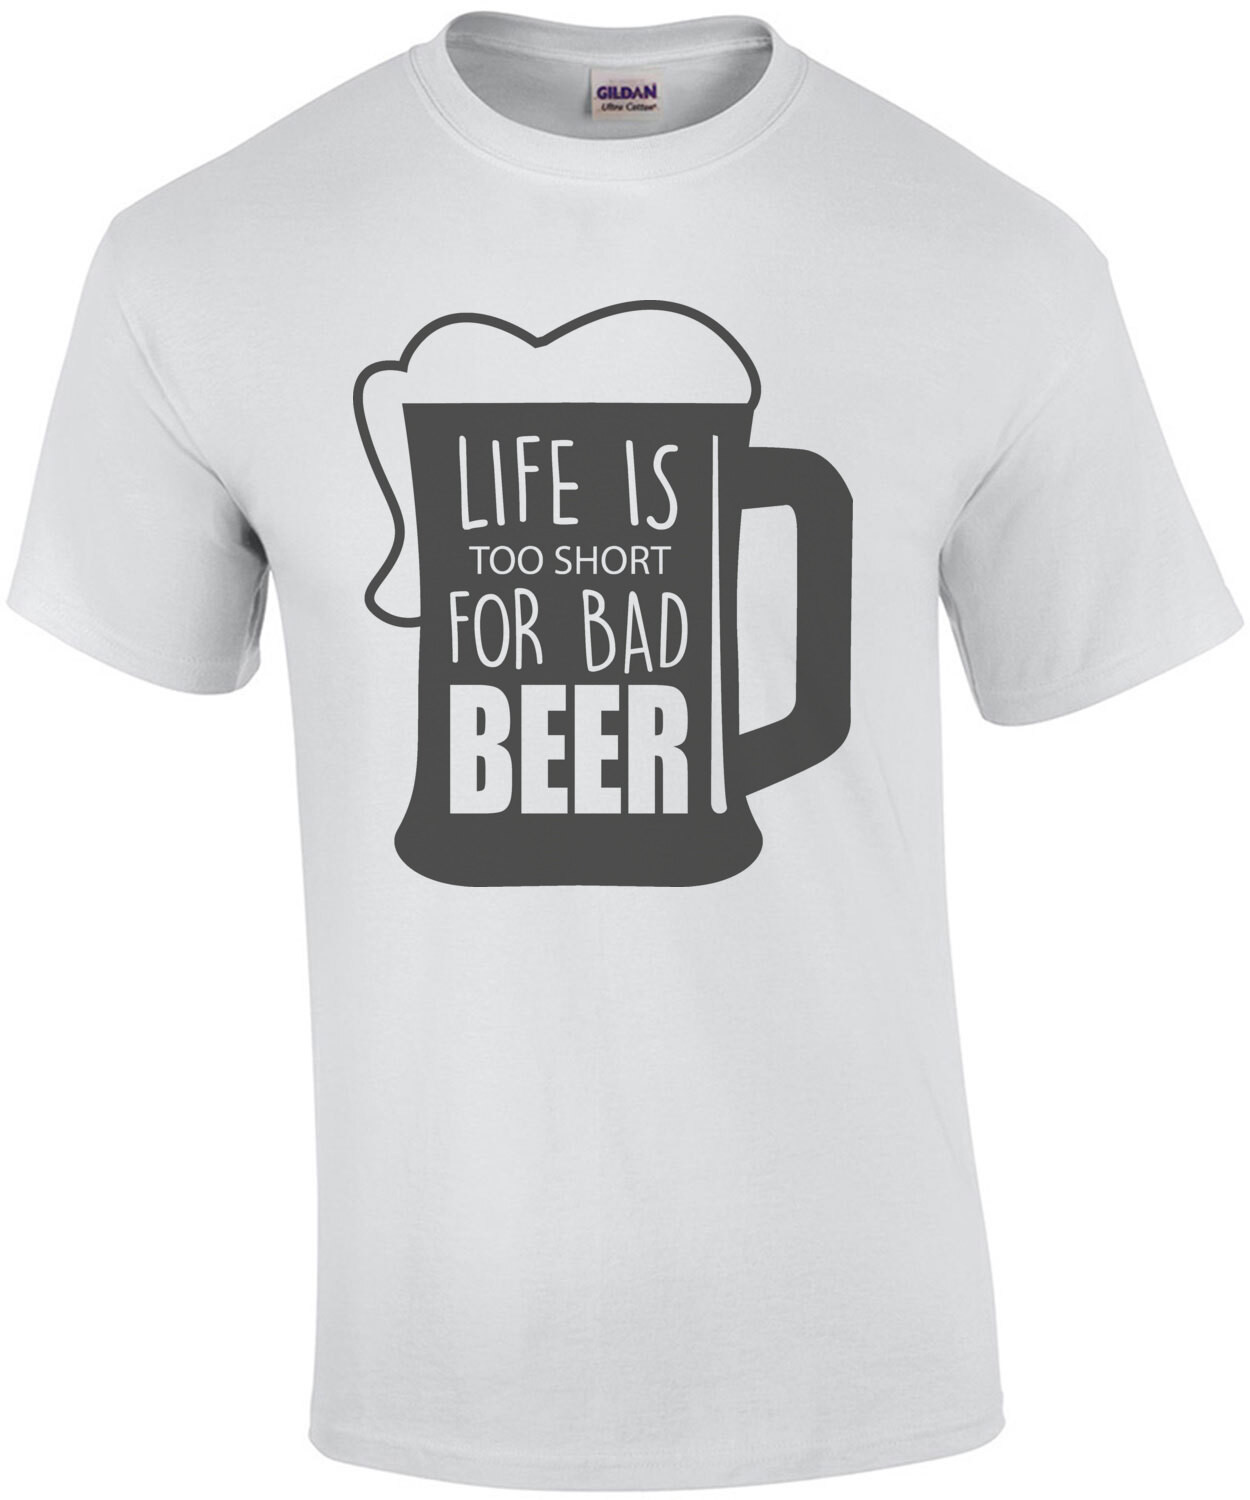 Life is too short for bad beer - beer t-shirt